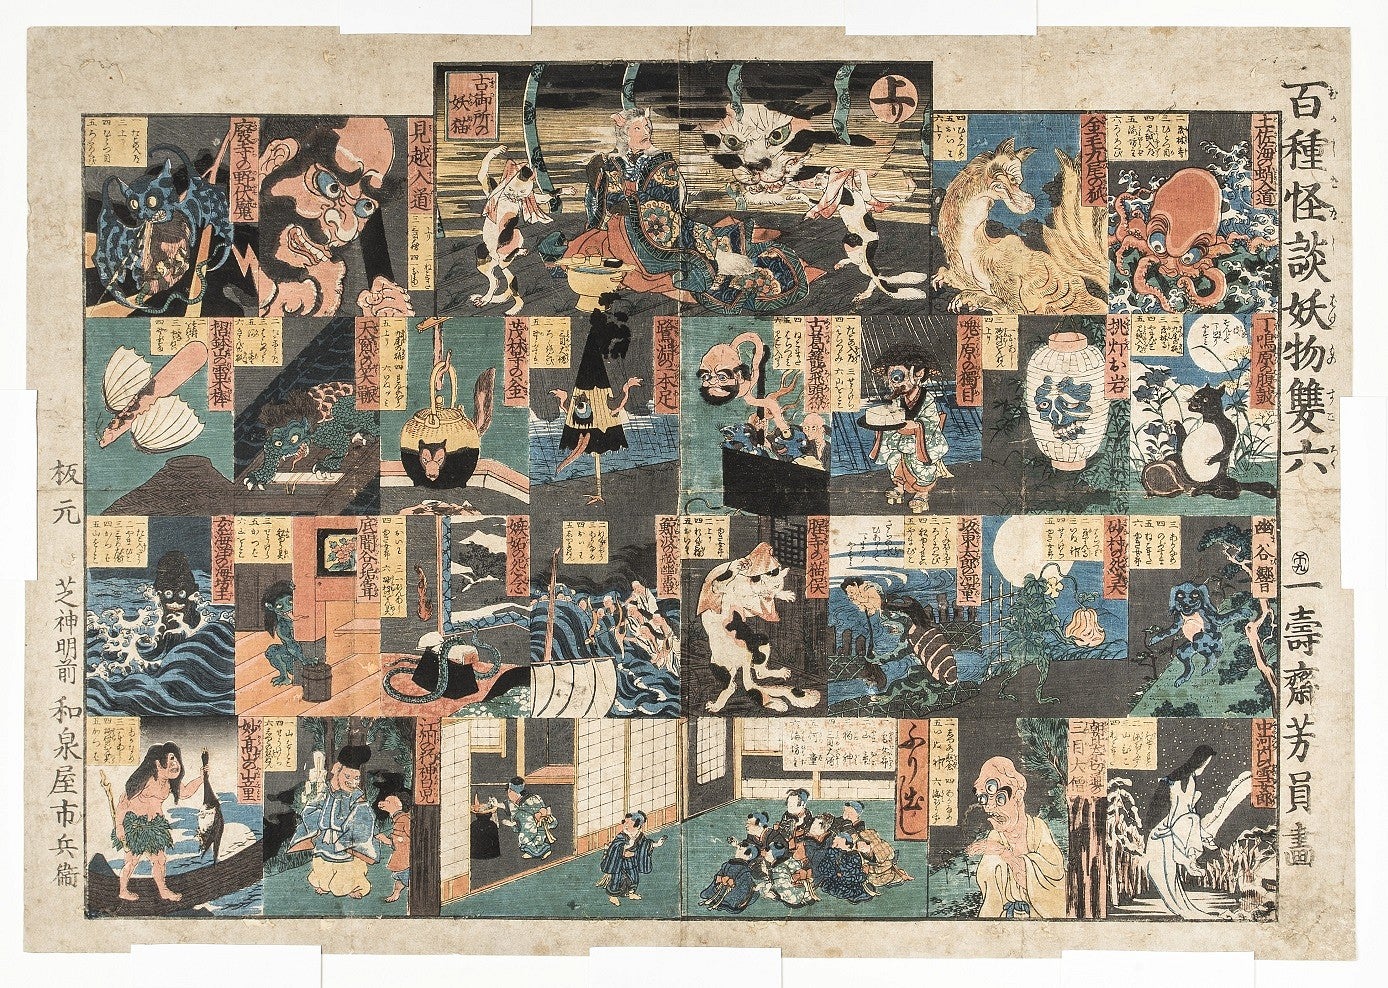 Antique Japanese game board depicts many types of yokai monsters